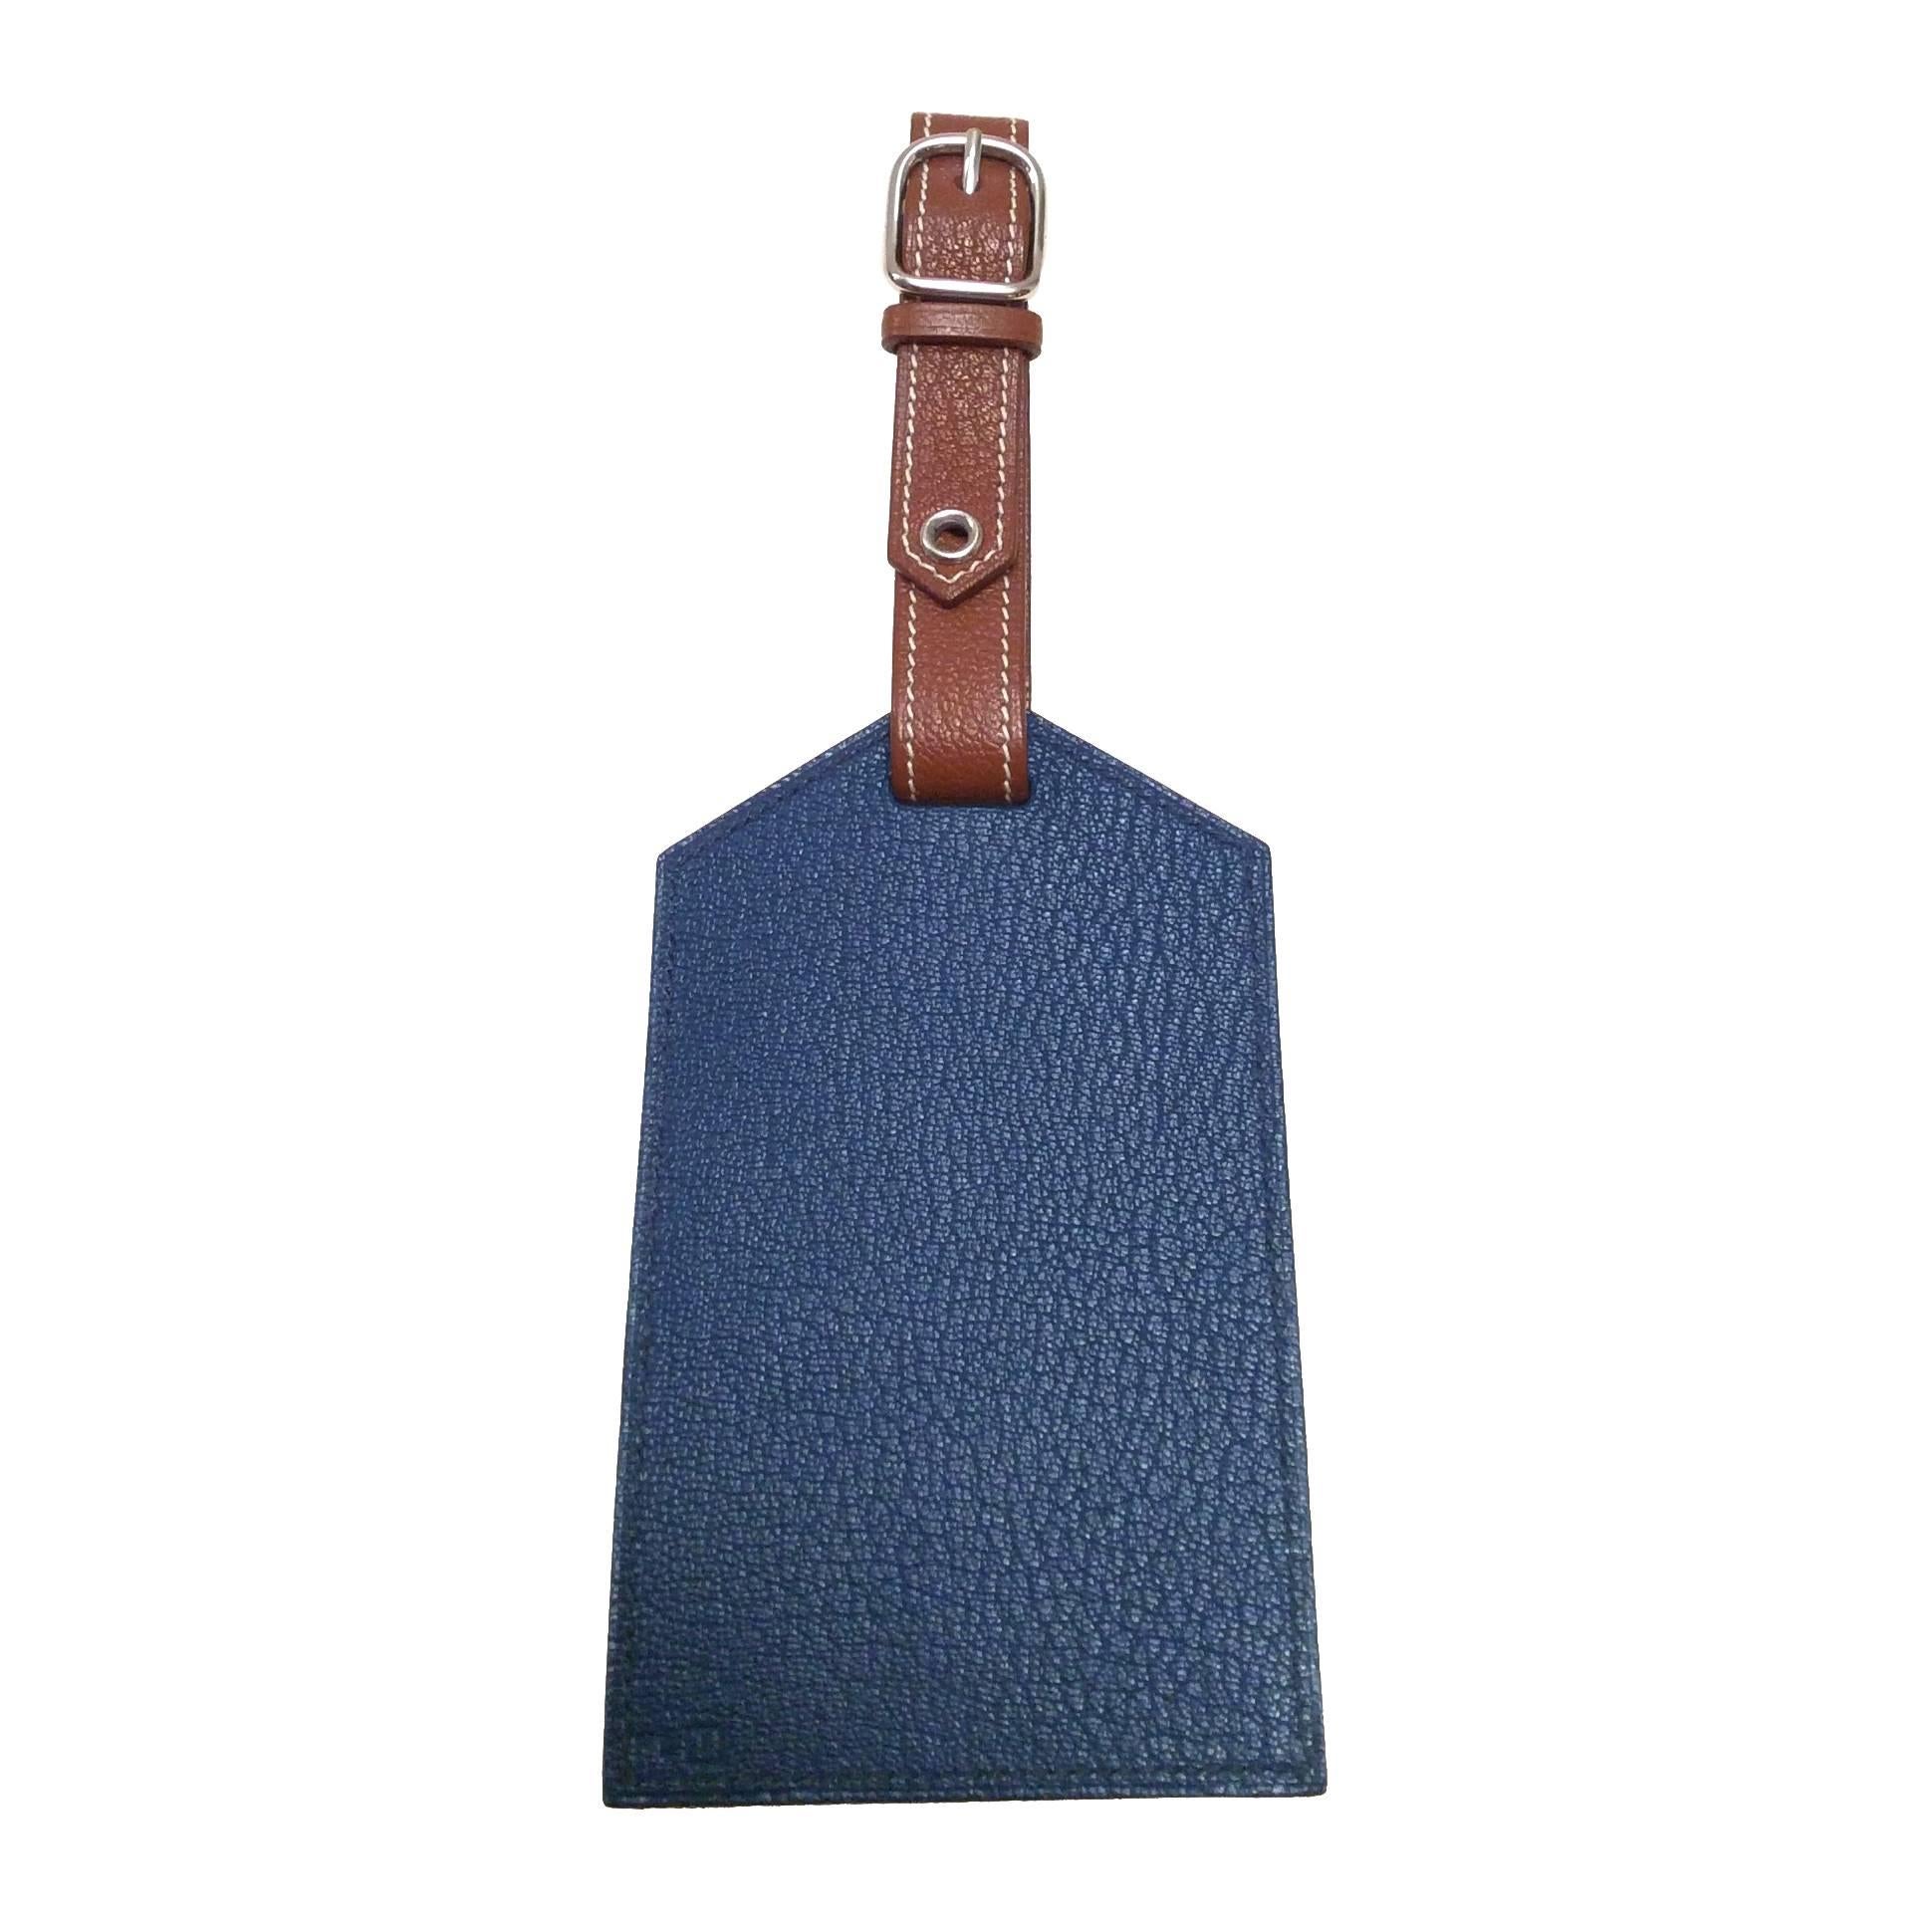 New Hermes Luggage Tag / Bag Charm - Blue and Brown  For Sale